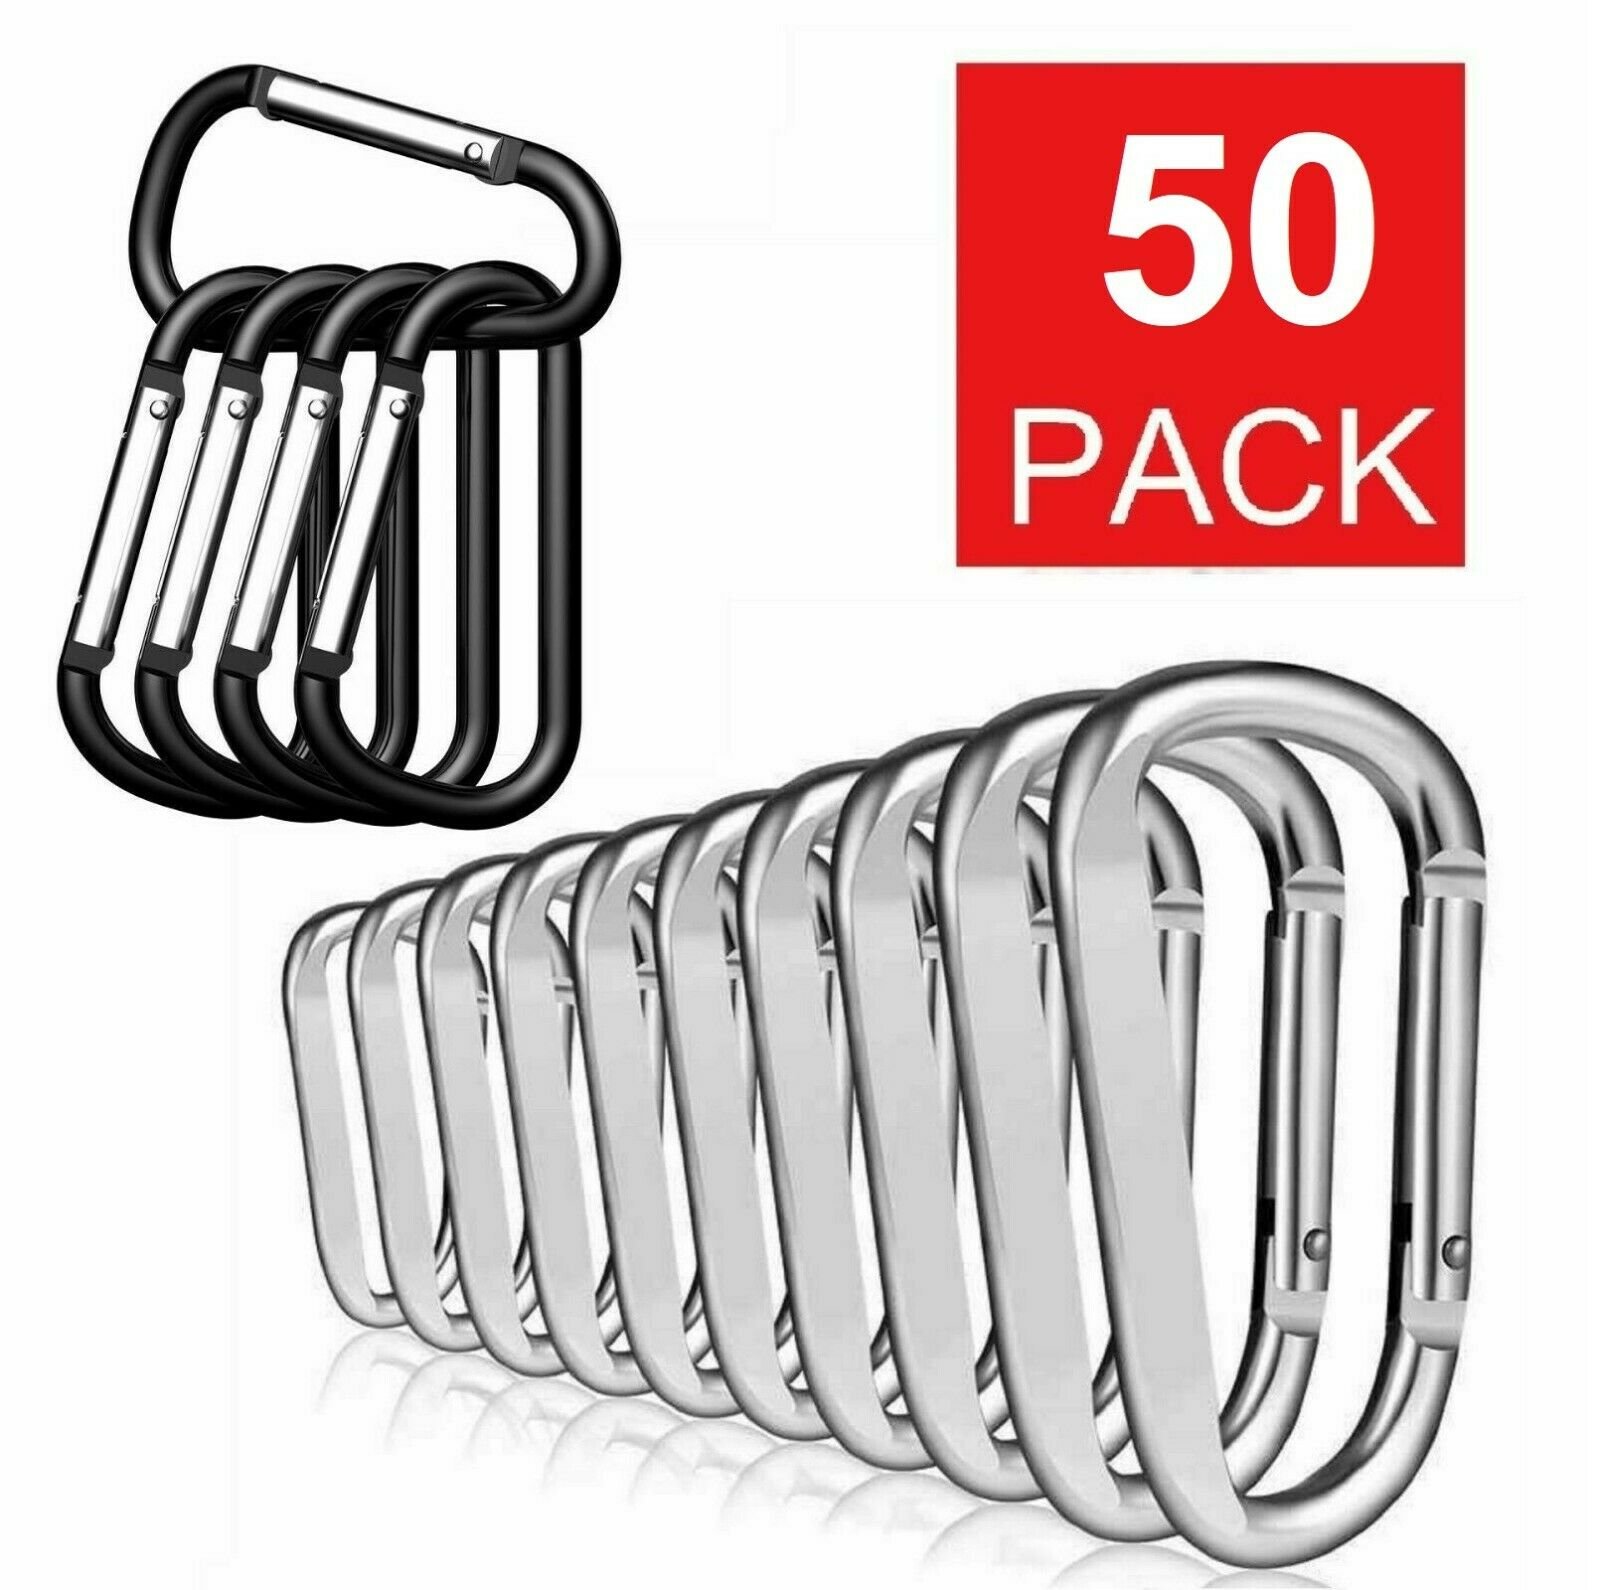 LOT 50 D SHAPED CARABINER SPRING BELT CLIP WITH RING 1-7/8" ALUMINUM 6 COLORS 